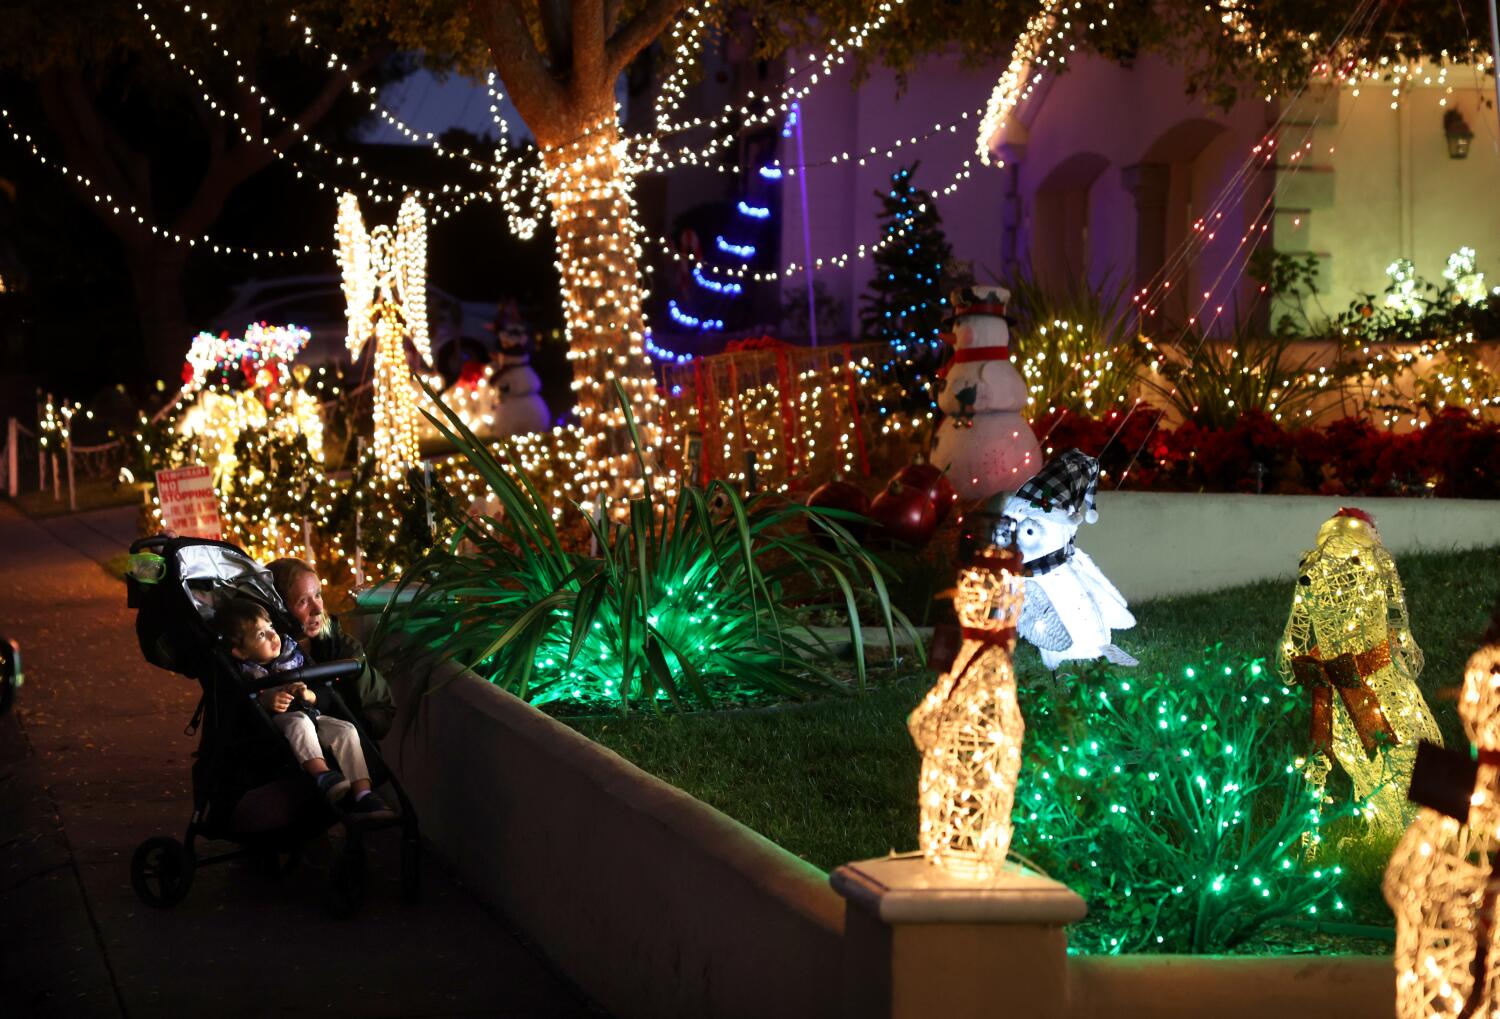 Christmas lights, crowds and high electric bills are a 39-year holiday tradition in this Torrance neighborhood